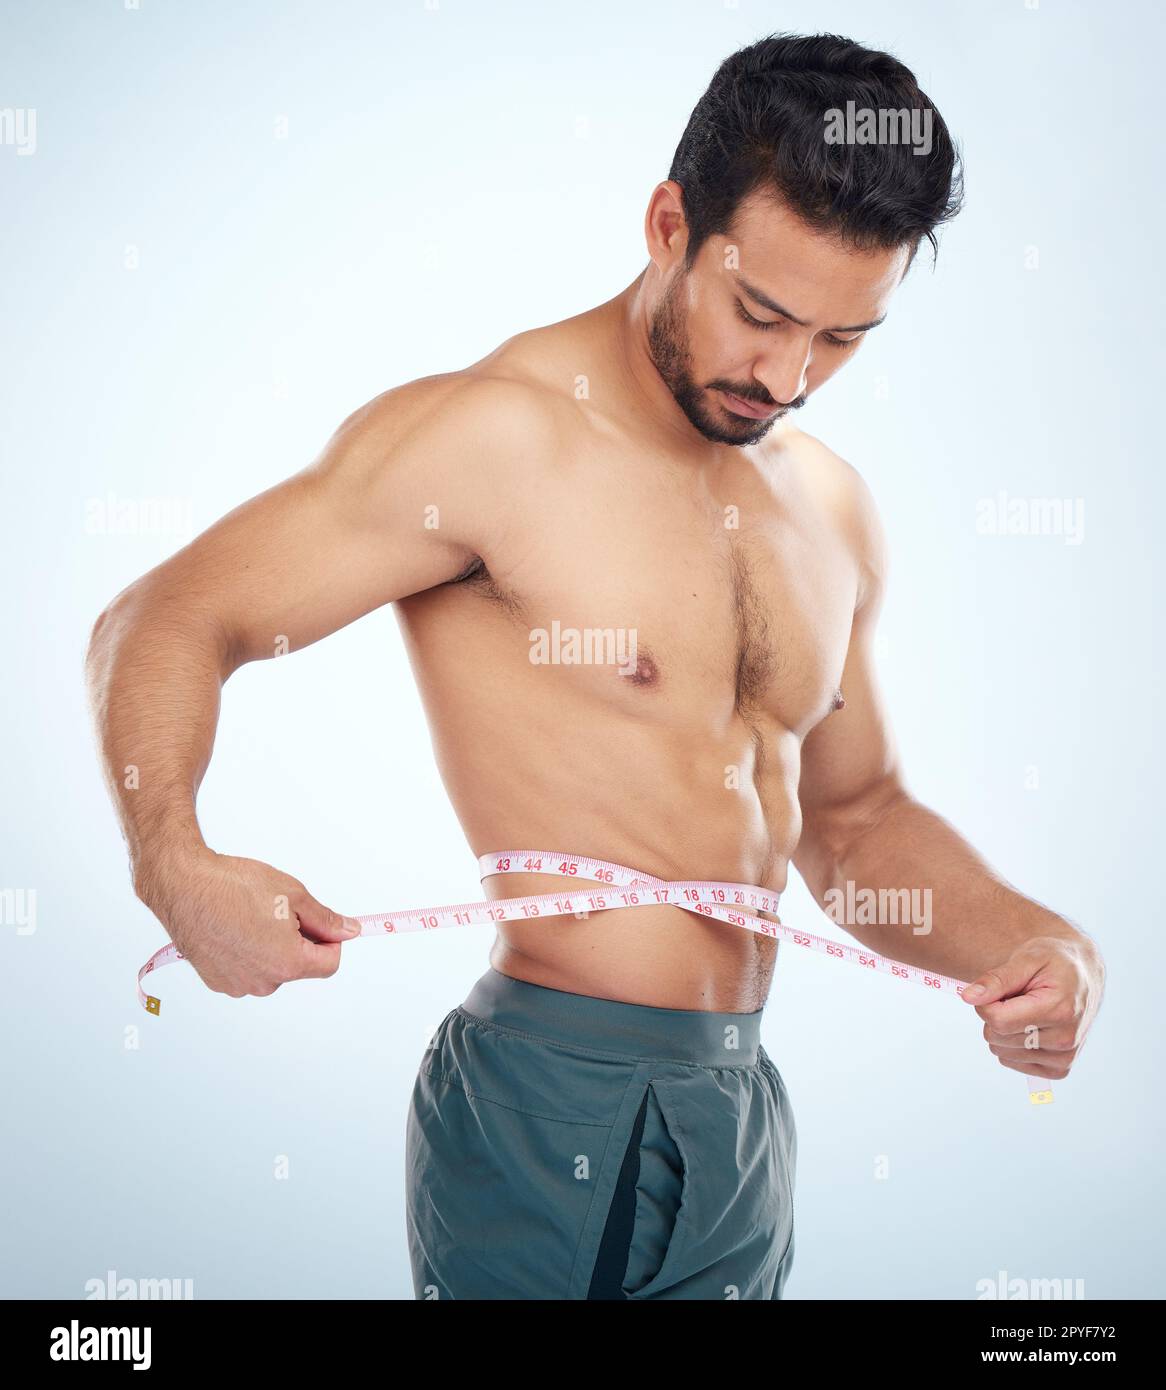 Measuring tape, stomach and woman in studio for wellness, weight